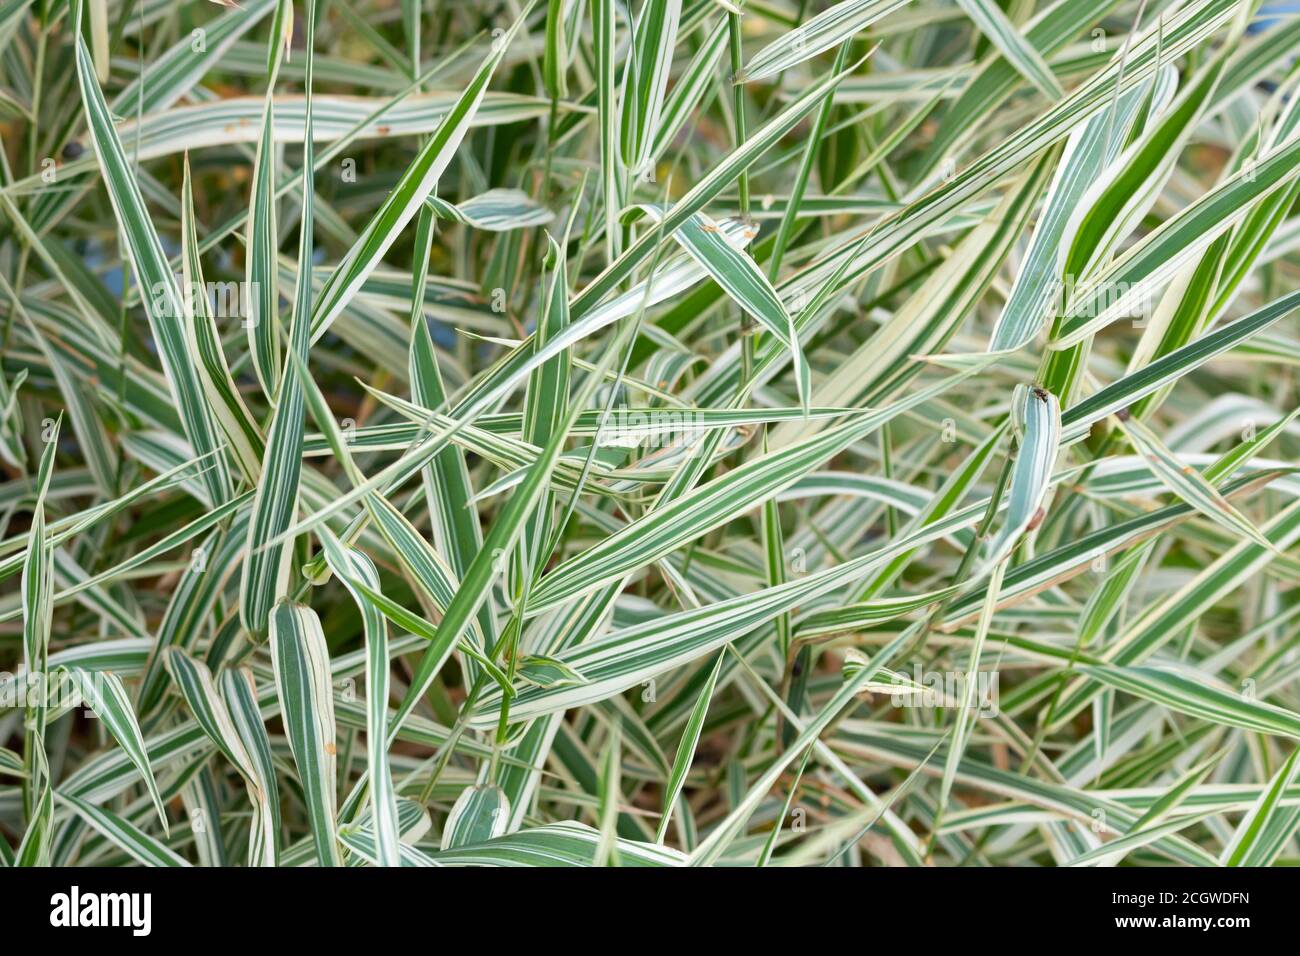 Green and white leaves of Phalaris arundinacea, also known as reed Canary grass Stock Photo